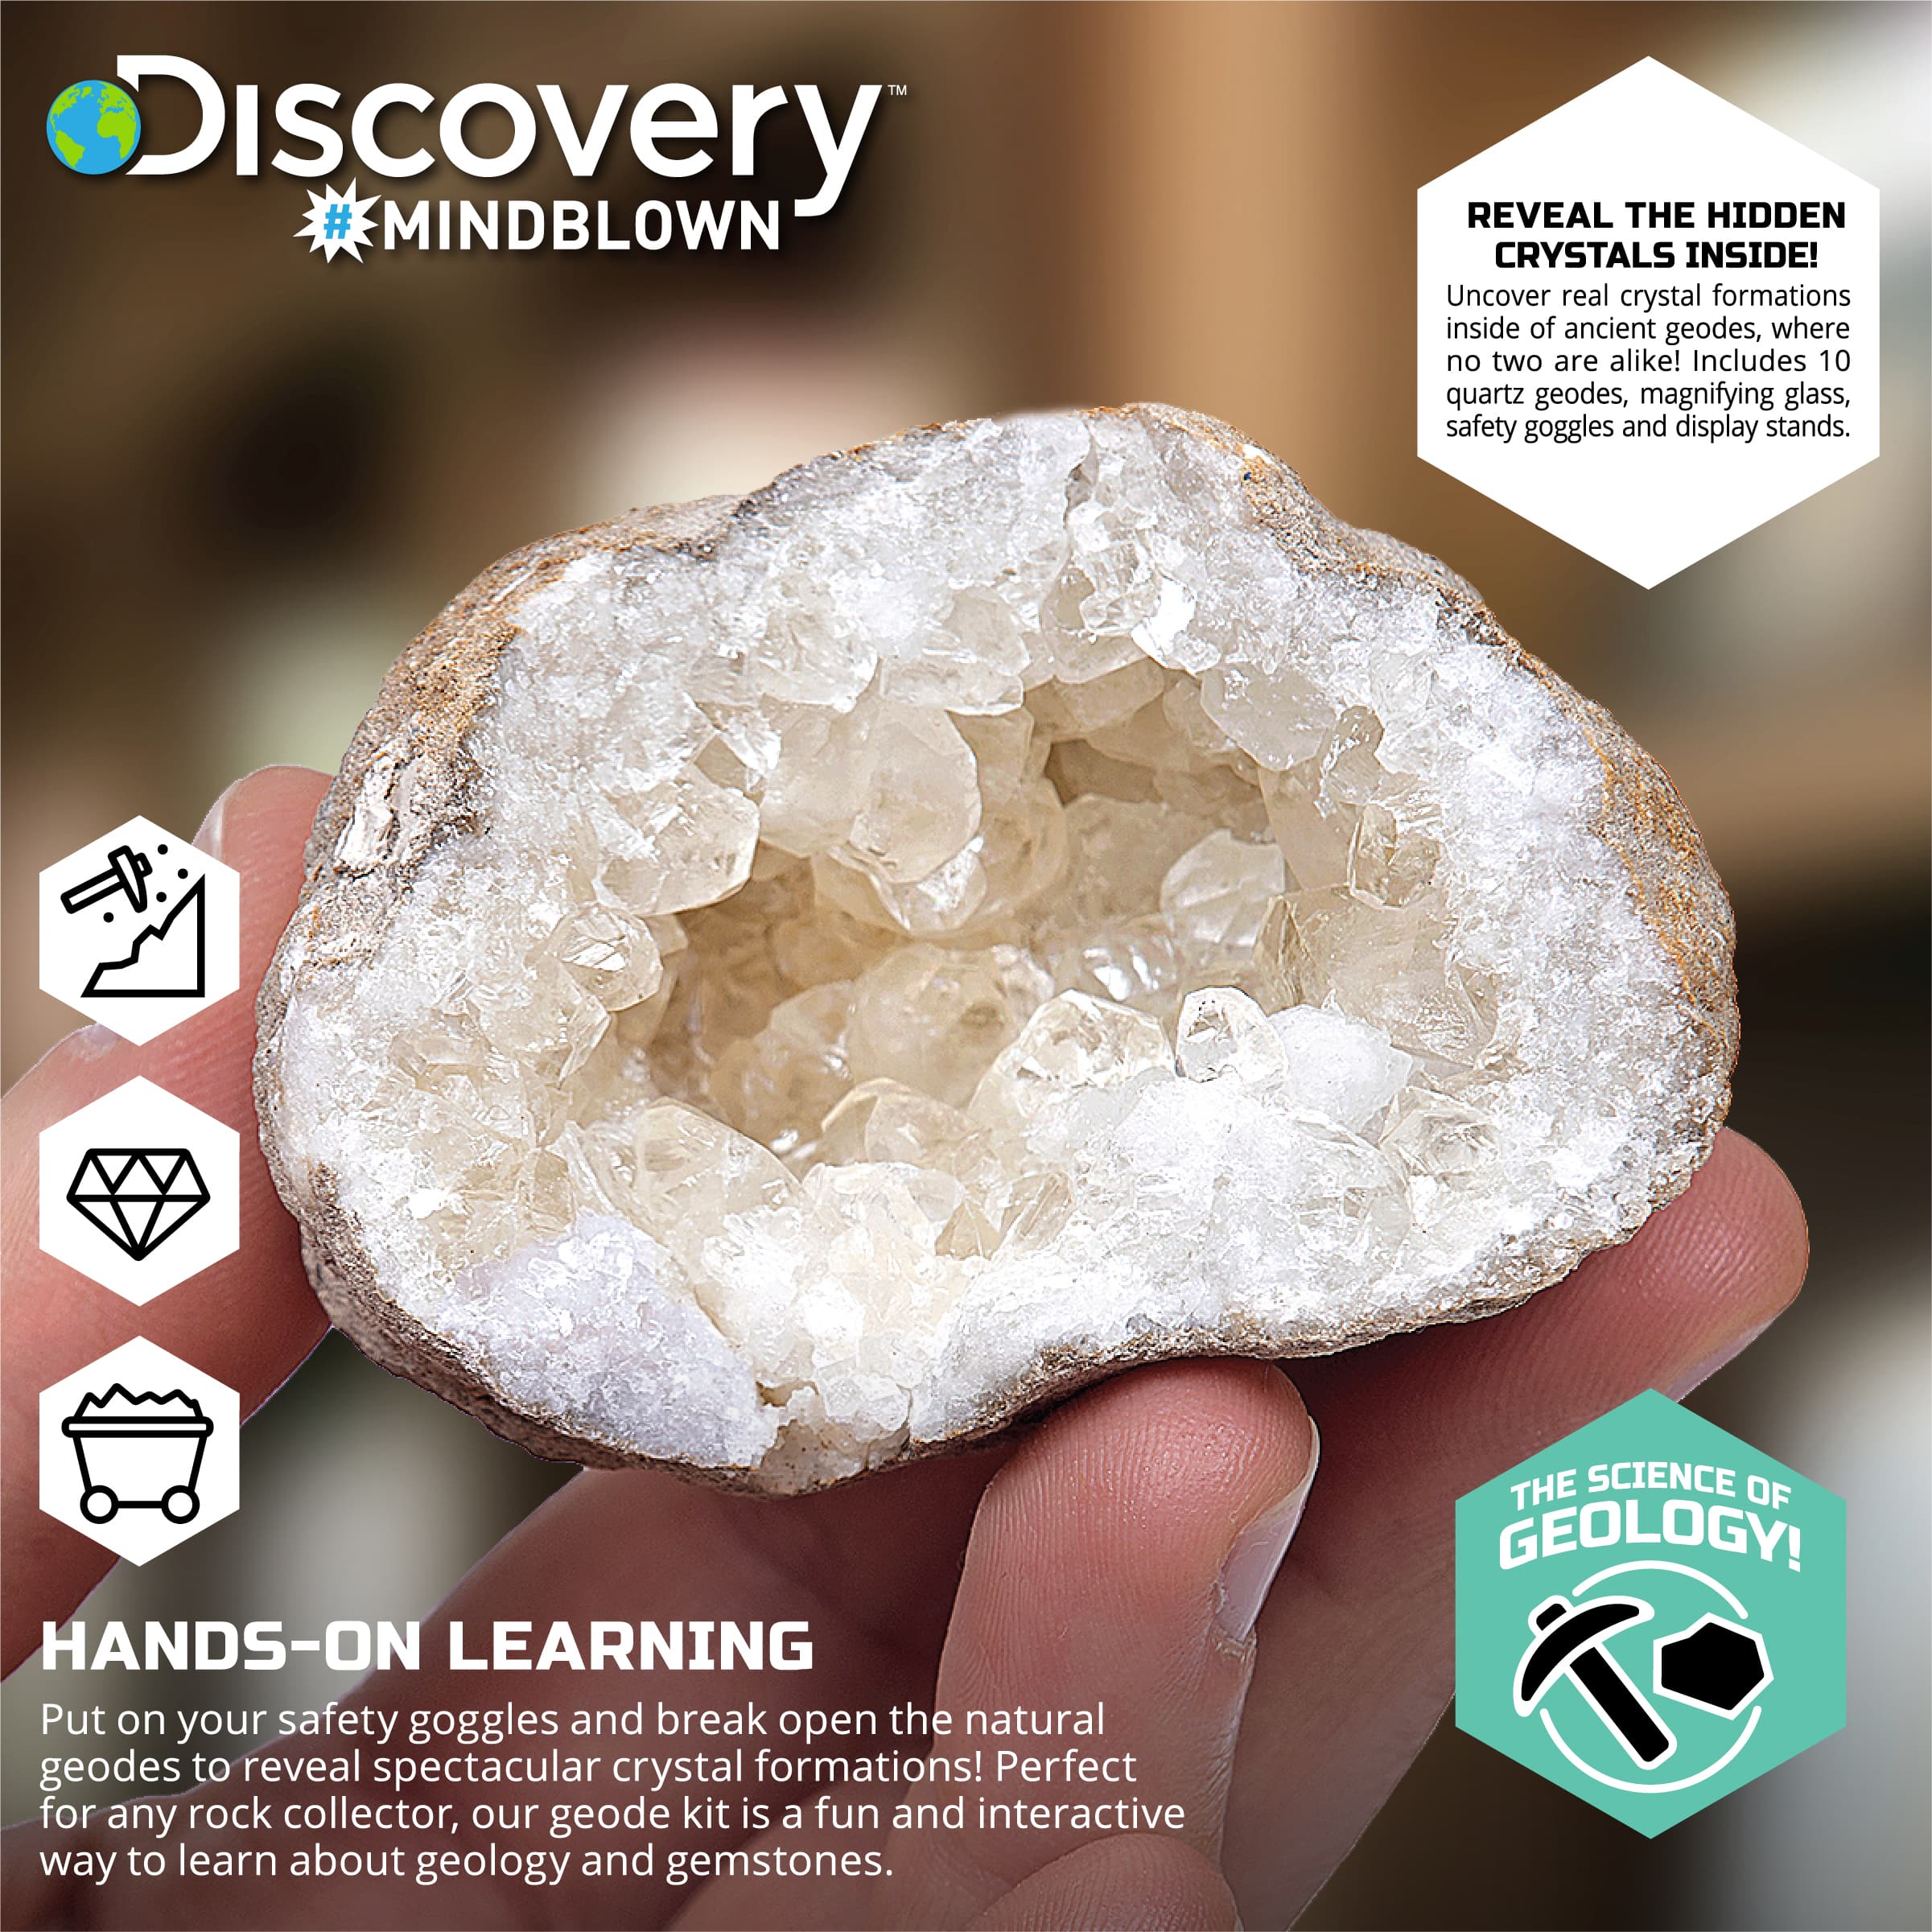 Discovery&#x2122; Mystery Crystals Geode Kit